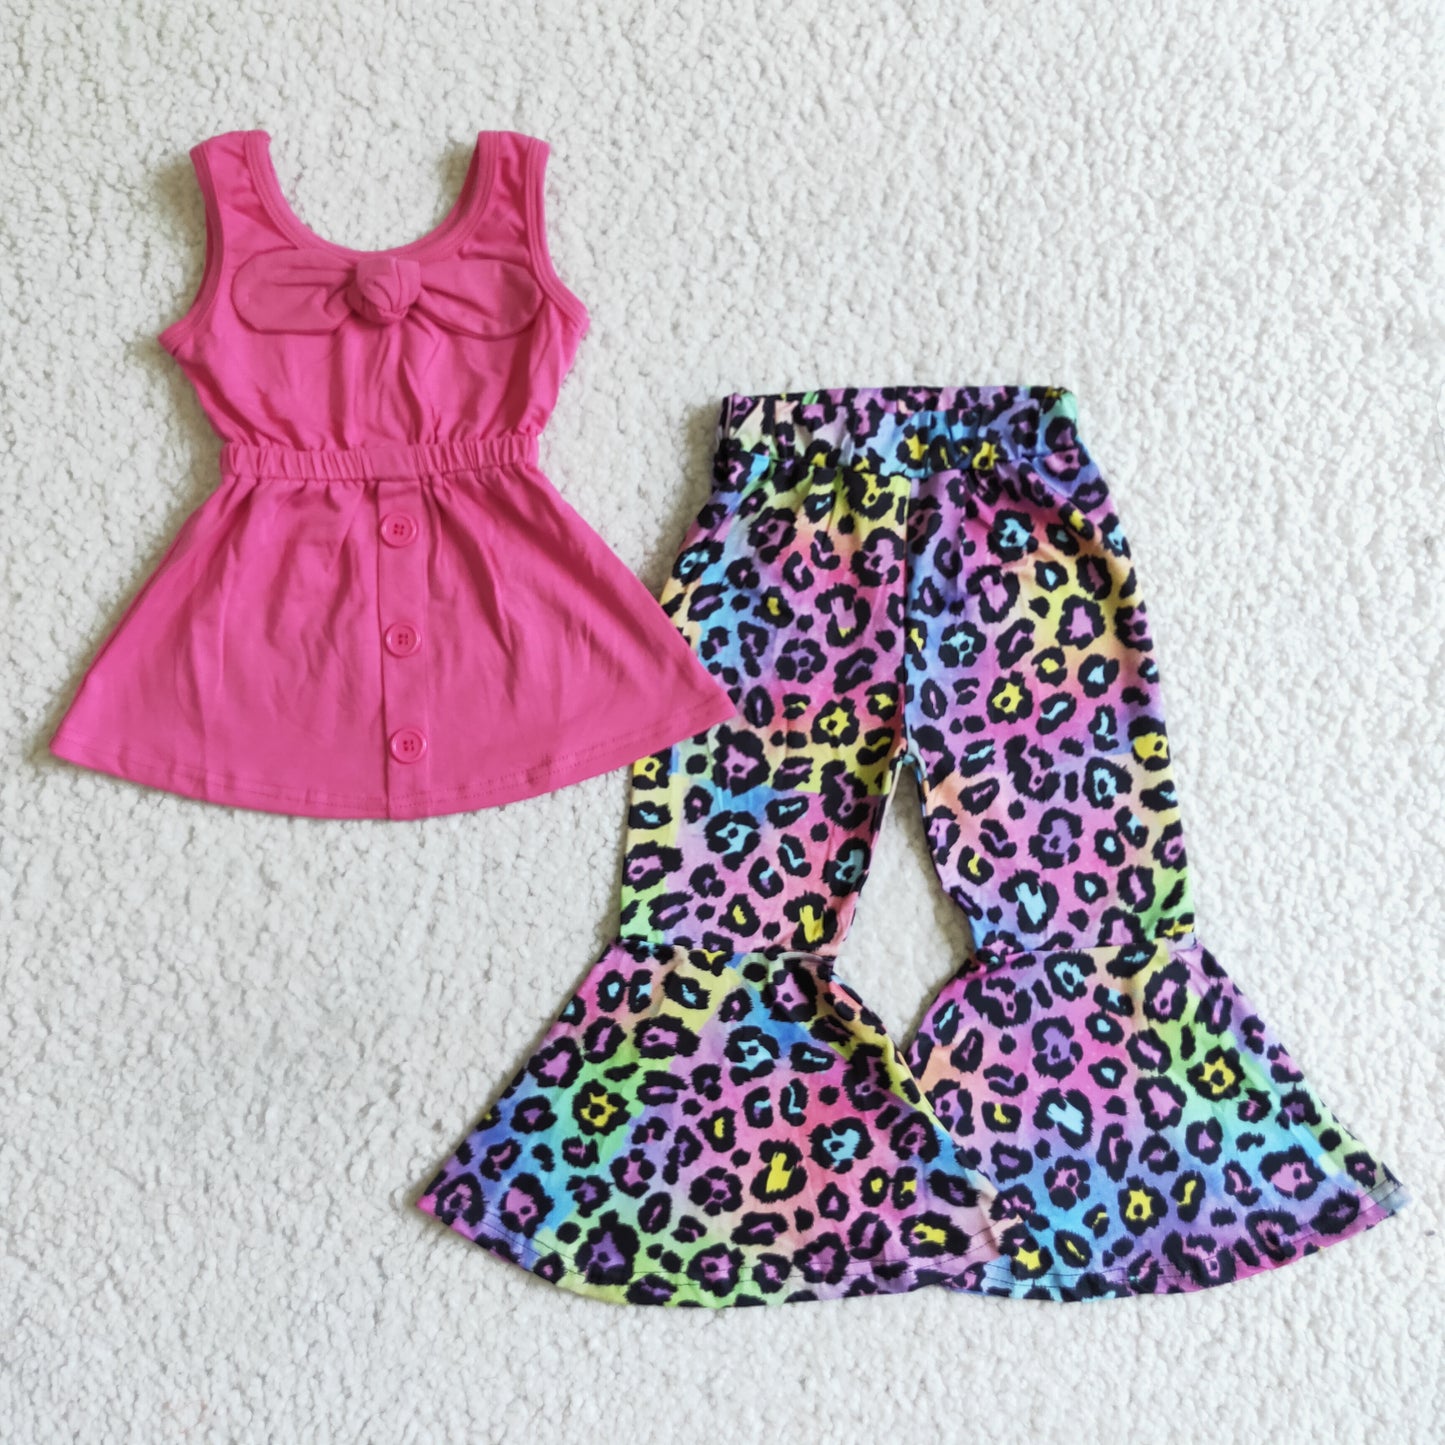 girls hot pink top leopards pants outfit